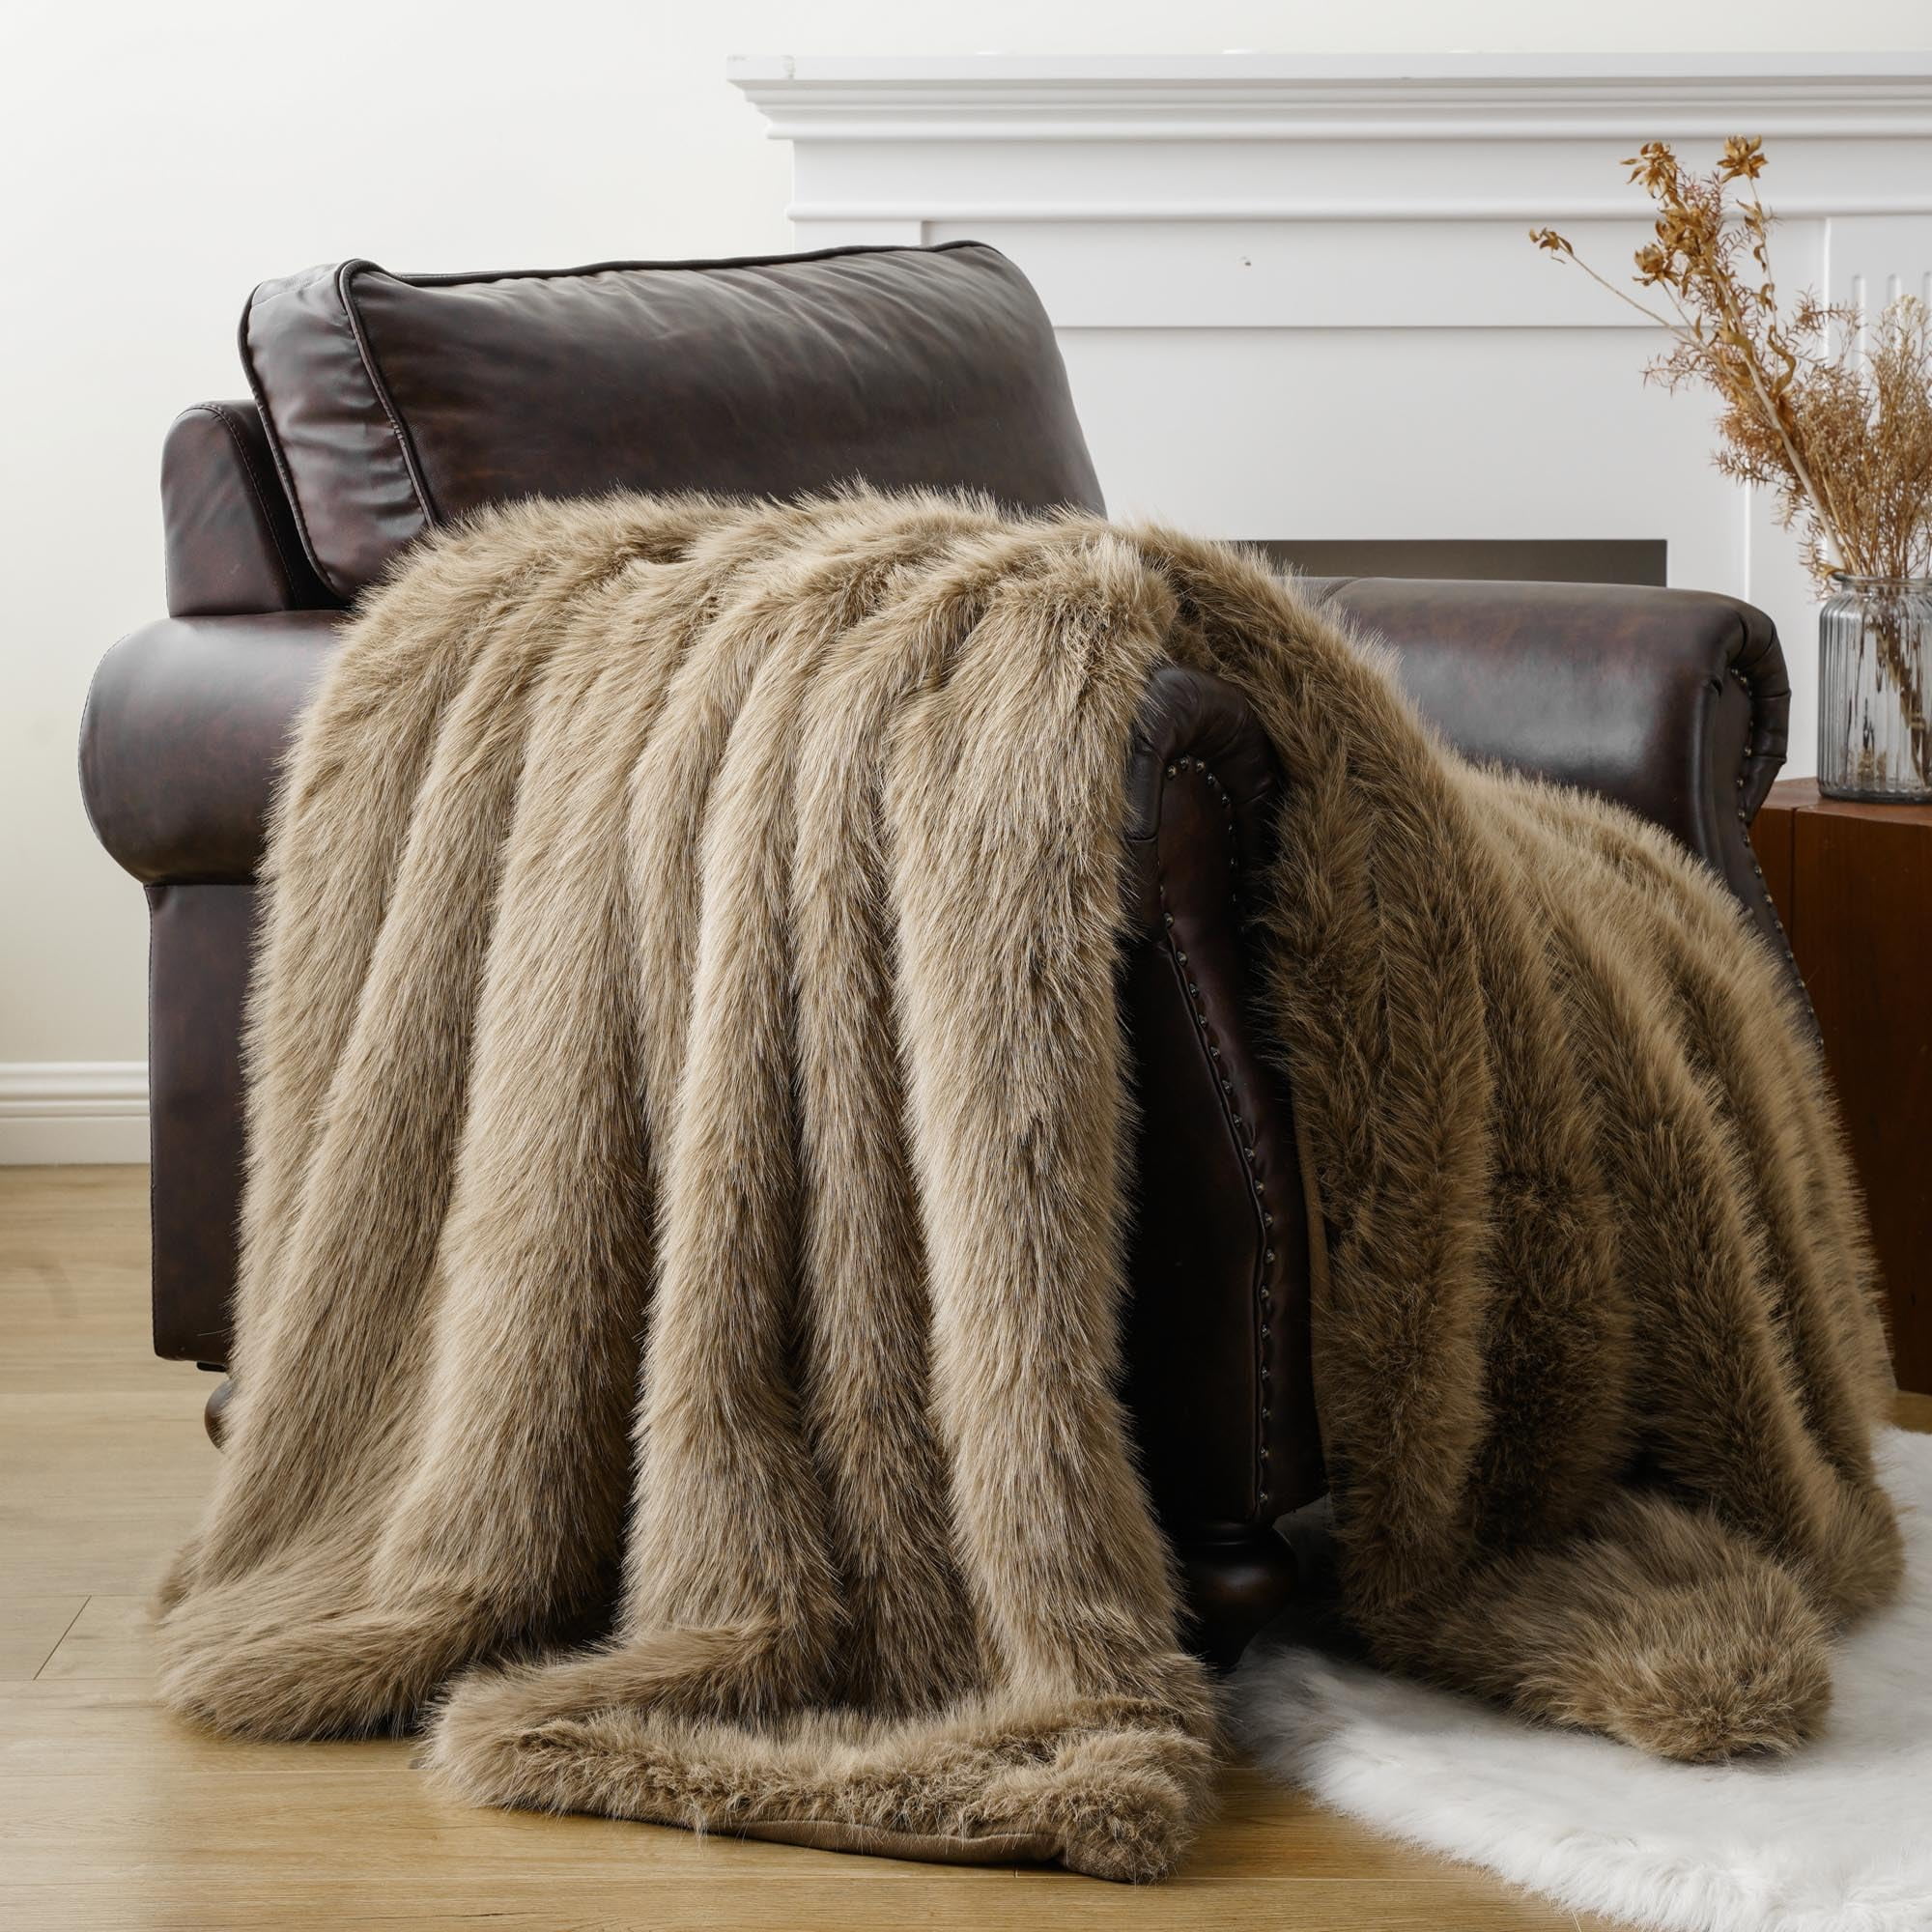  BATTILO HOME Luxury Black Faux Fur Throw Blanket, Large Cozy  Warm Fluffy Fur Blanket for Bed,Couch, Sofa, Chair, Black Fur Throws with  Long Pile, 60x80 : Home & Kitchen